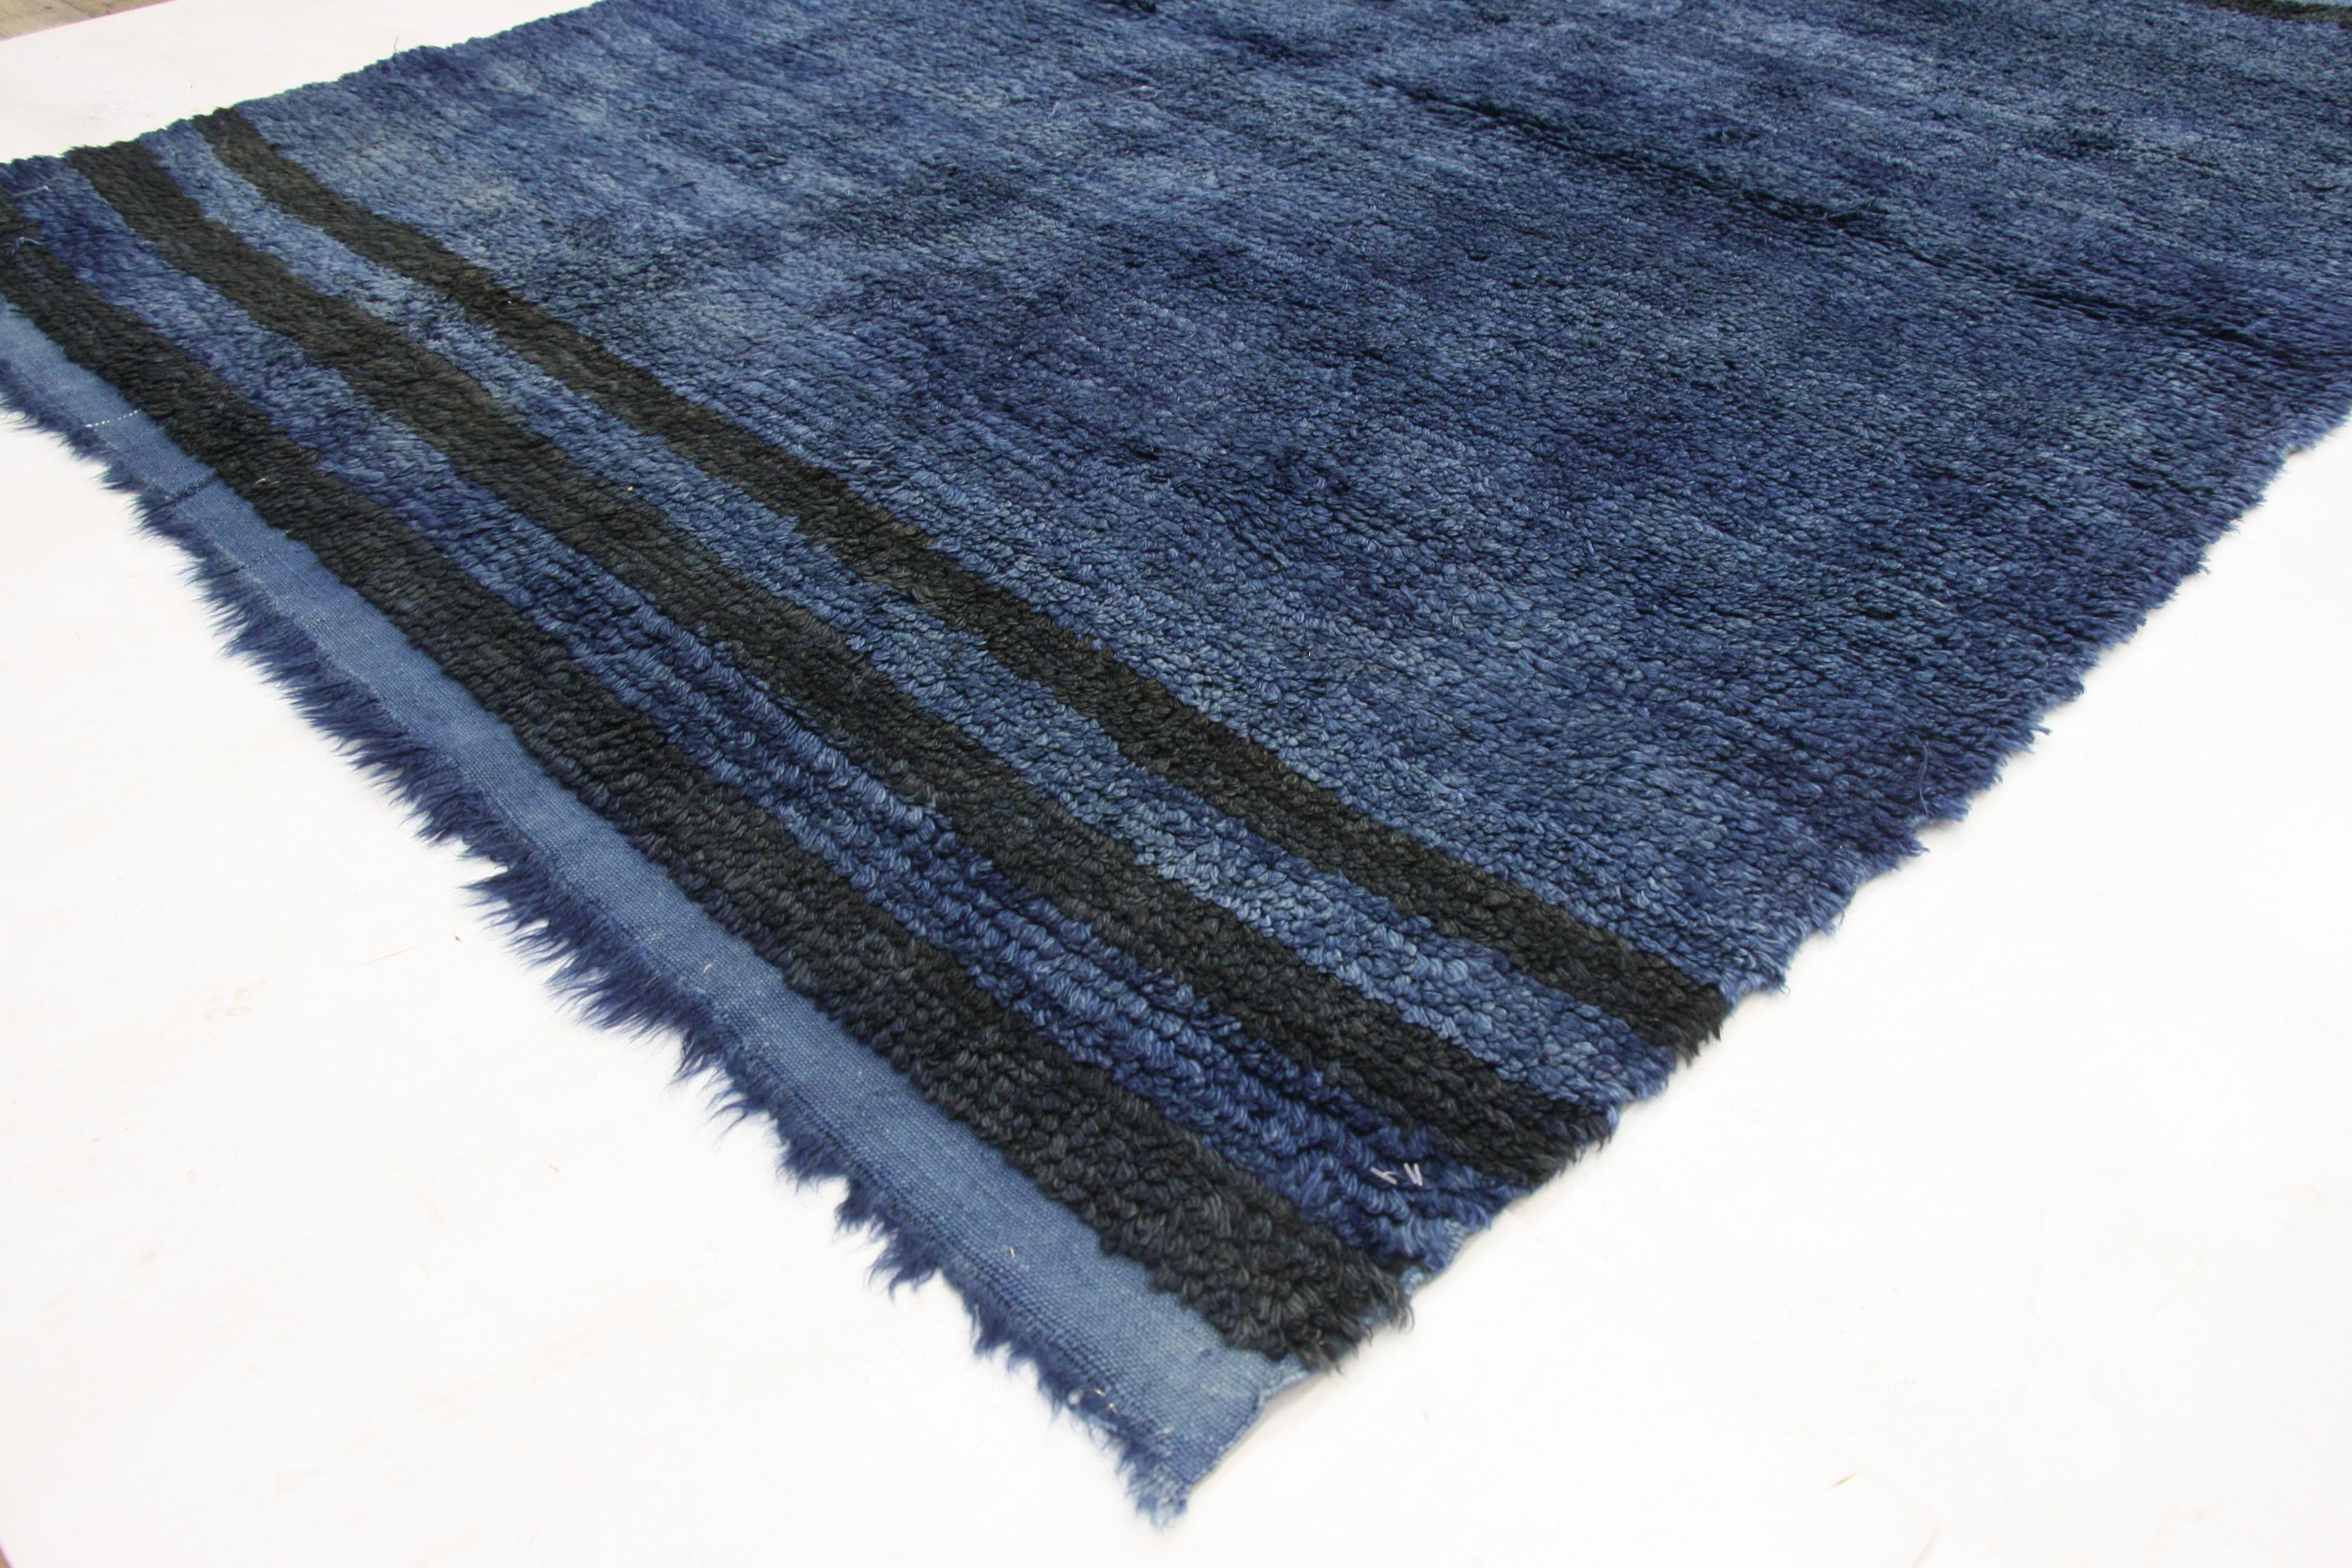 73980, vintage Turkish Angora wool rug with Mid-Century Modern style. This blue vintage Turkish rug features a plush pile of angora wool. Three stripes the length of the width grace both ends in a deeper hue, adding additional interest and symmetry